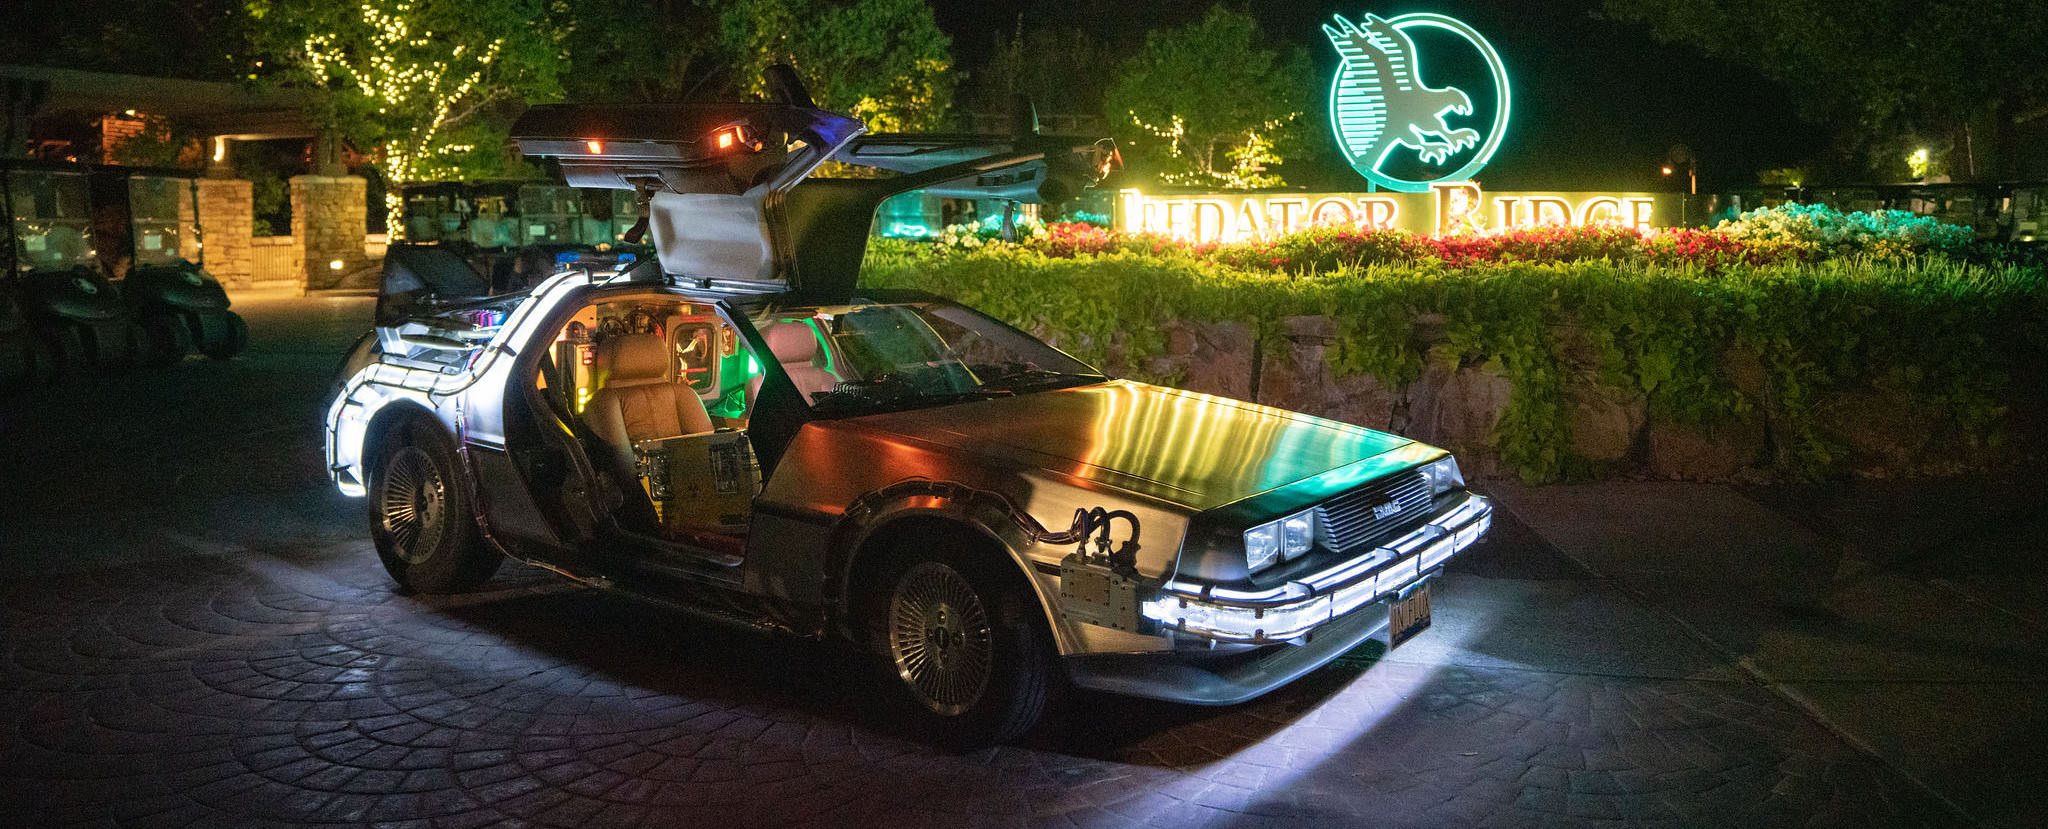 DeLorean 'Time Machine' replica exterior: time bands lit up at night, and a case of plutonium in the passenger seat.